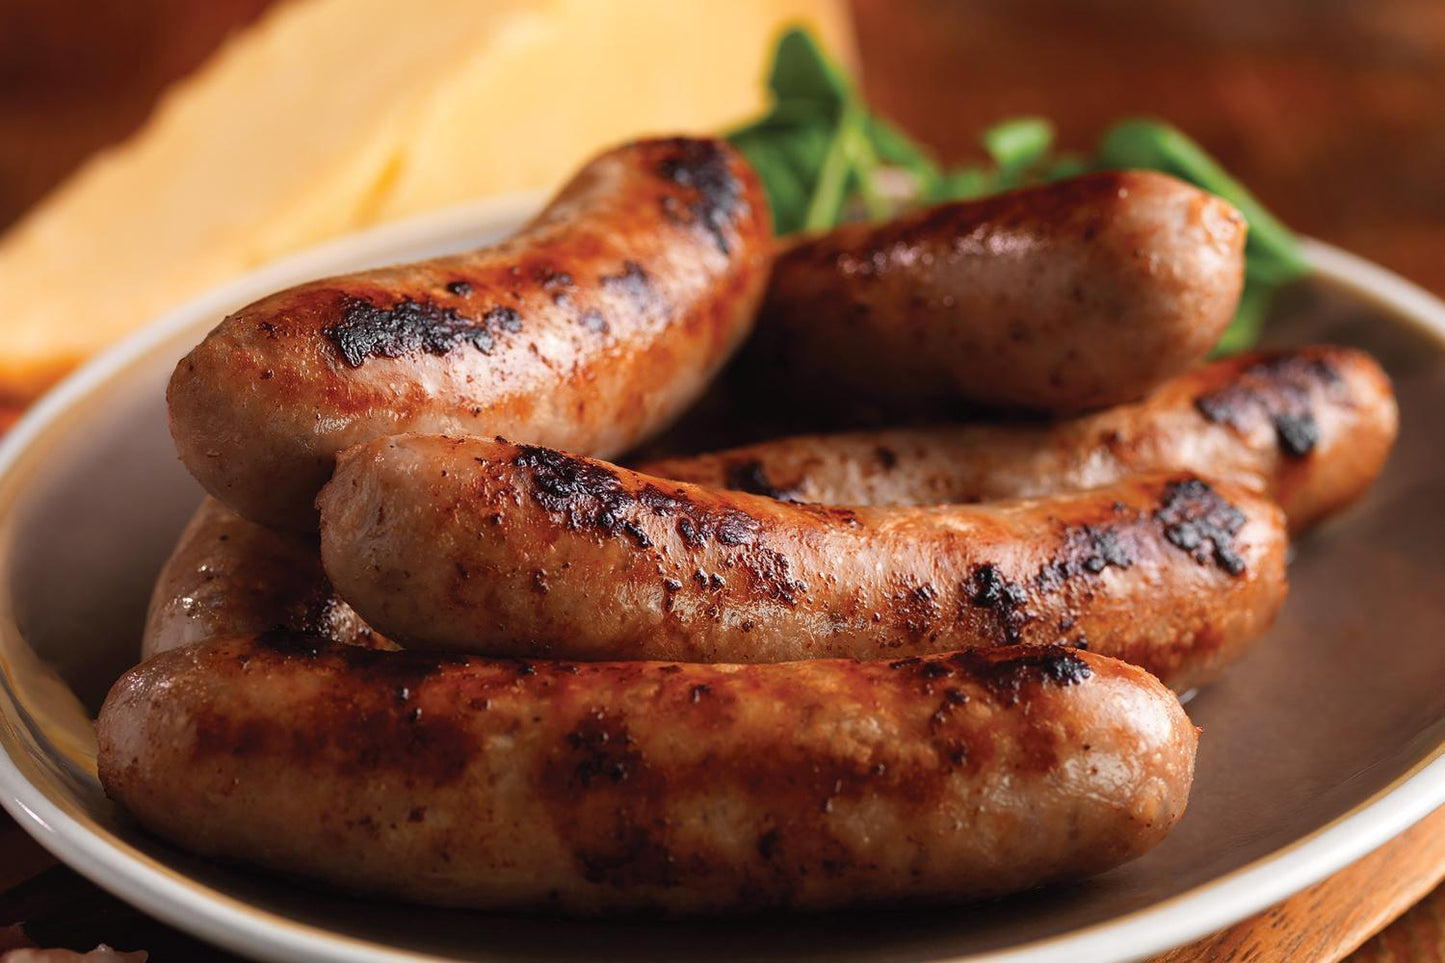 Lincolnshire Sausages - DukesHill